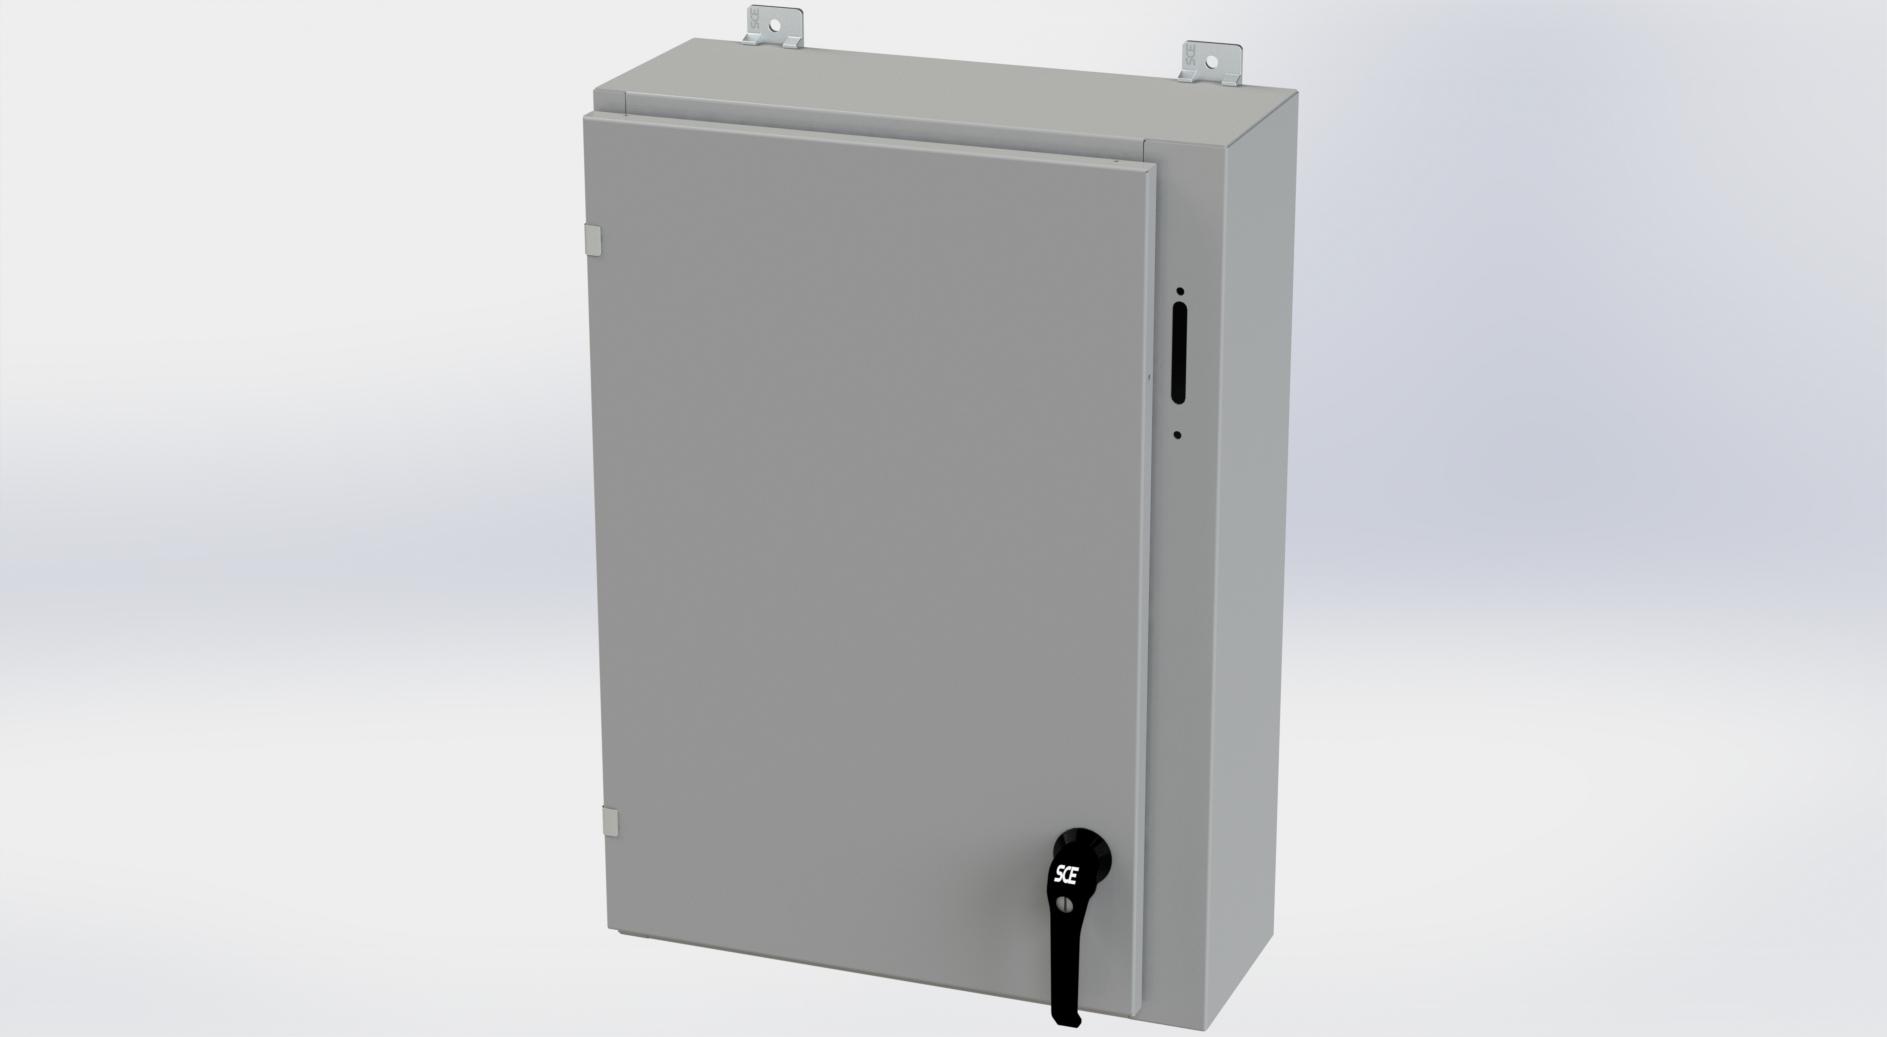 Saginaw Control SCE-30SA2208LPPL Obselete Use SCE-30XEL2108LP, Height:30.00", Width:21.38", Depth:8.00", ANSI-61 gray powder coating inside and out. Optional sub-panels are powder coated white.